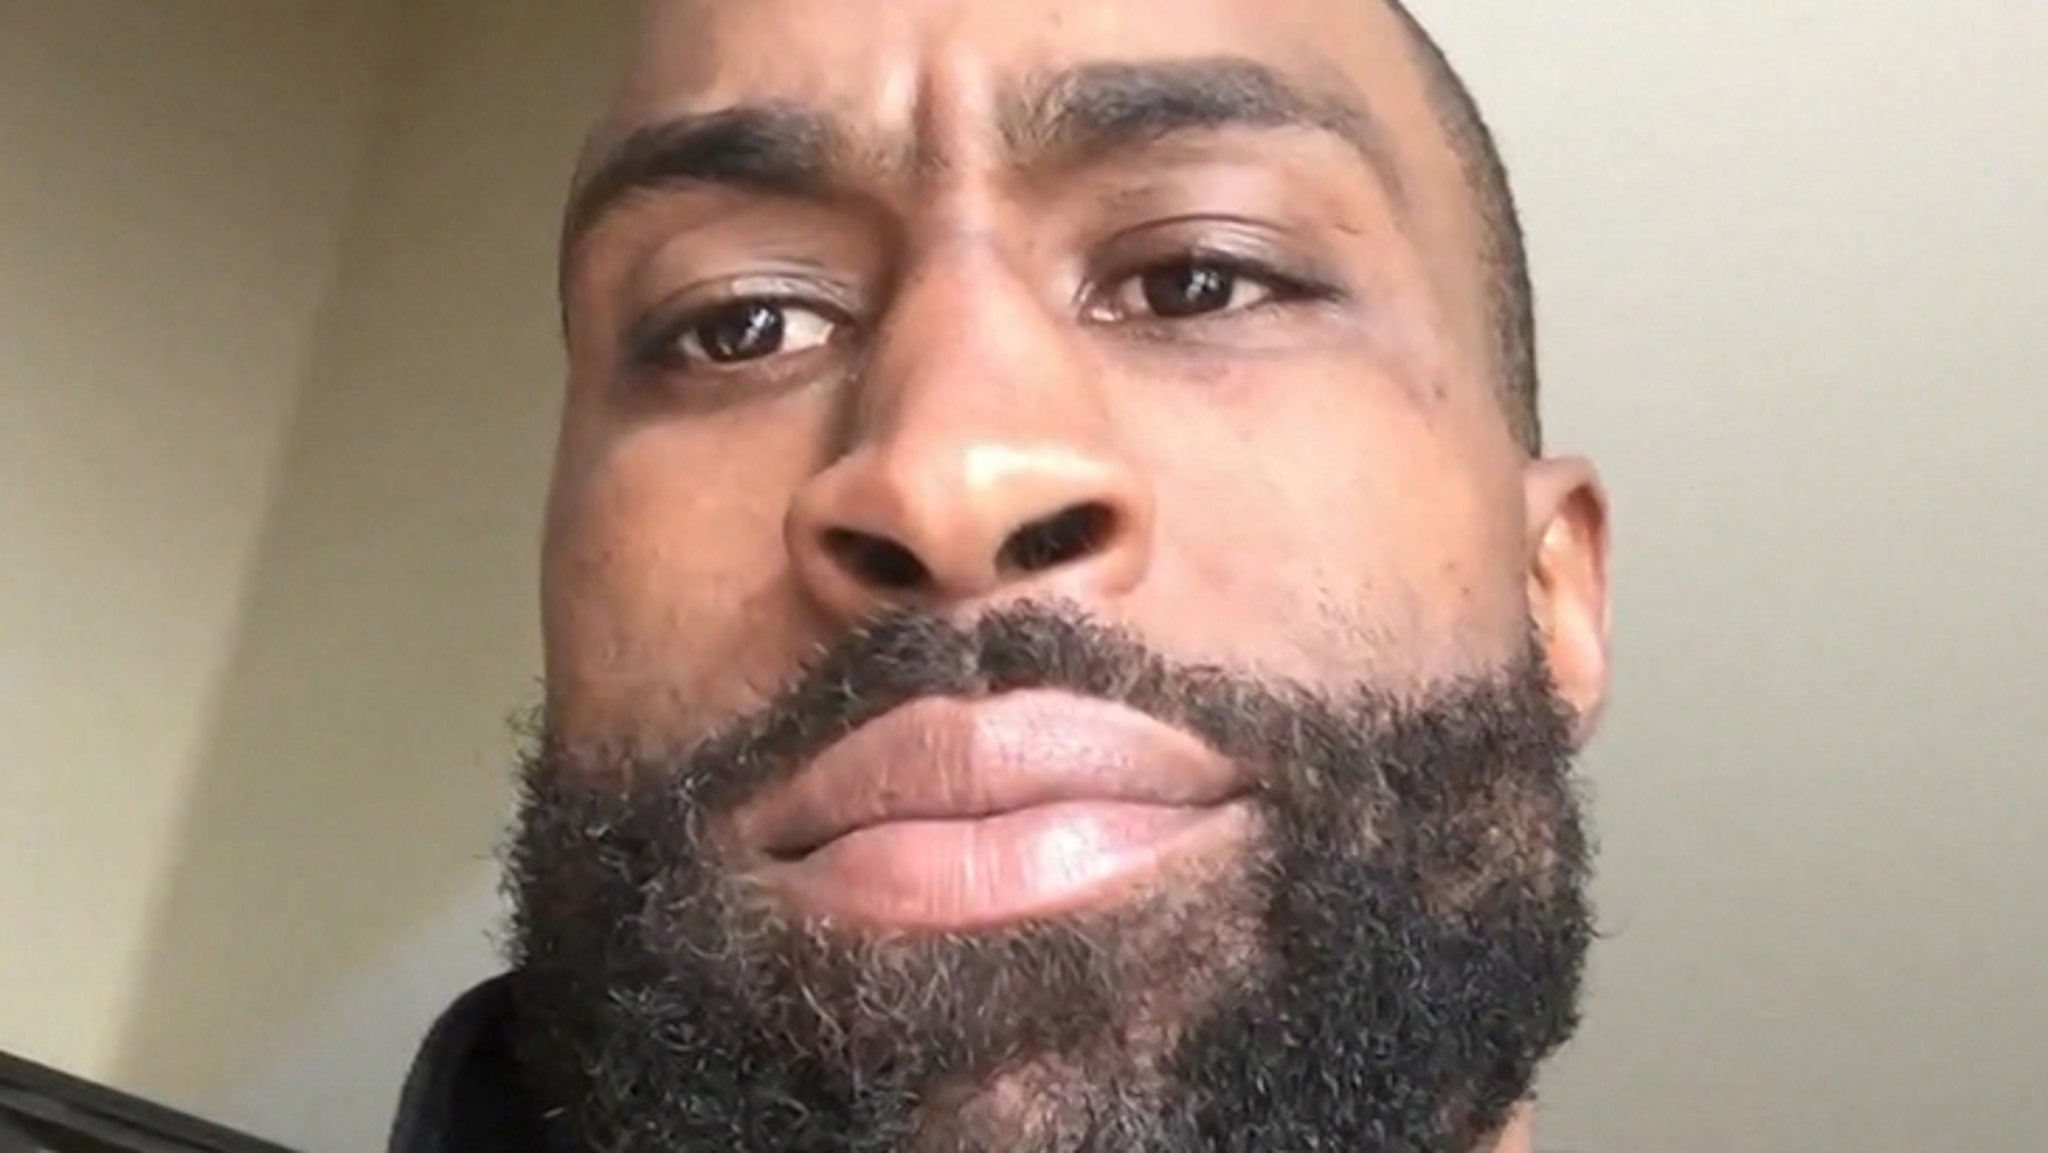 Ex-NFL Star Brandon Browner Charged With Attempted Murder, Faces Life ...